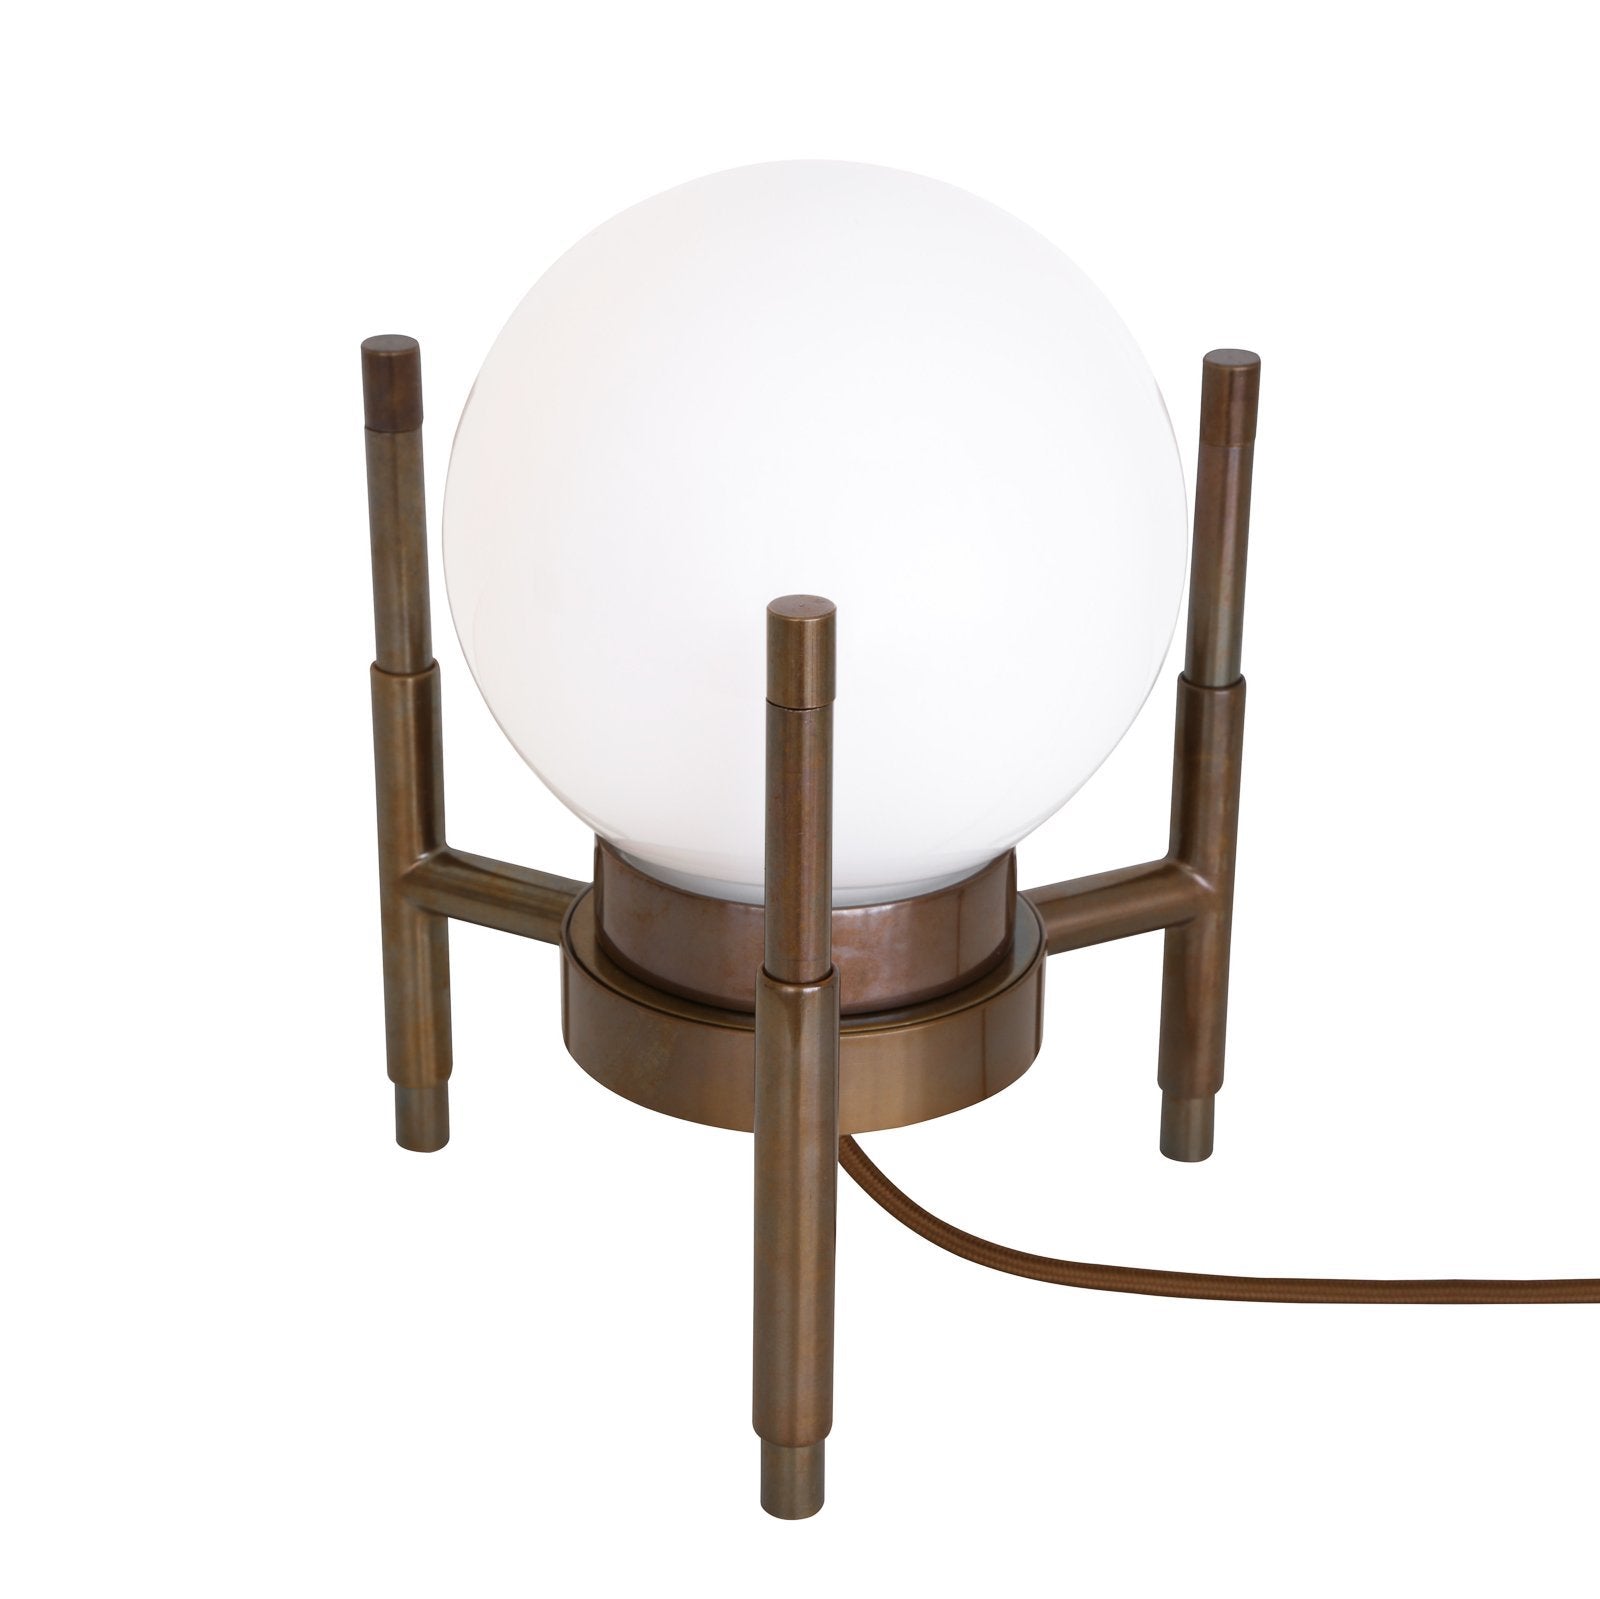 Eske Table Lamp - Table Lamps from RETROLIGHT. Made by Mullan Lighting.